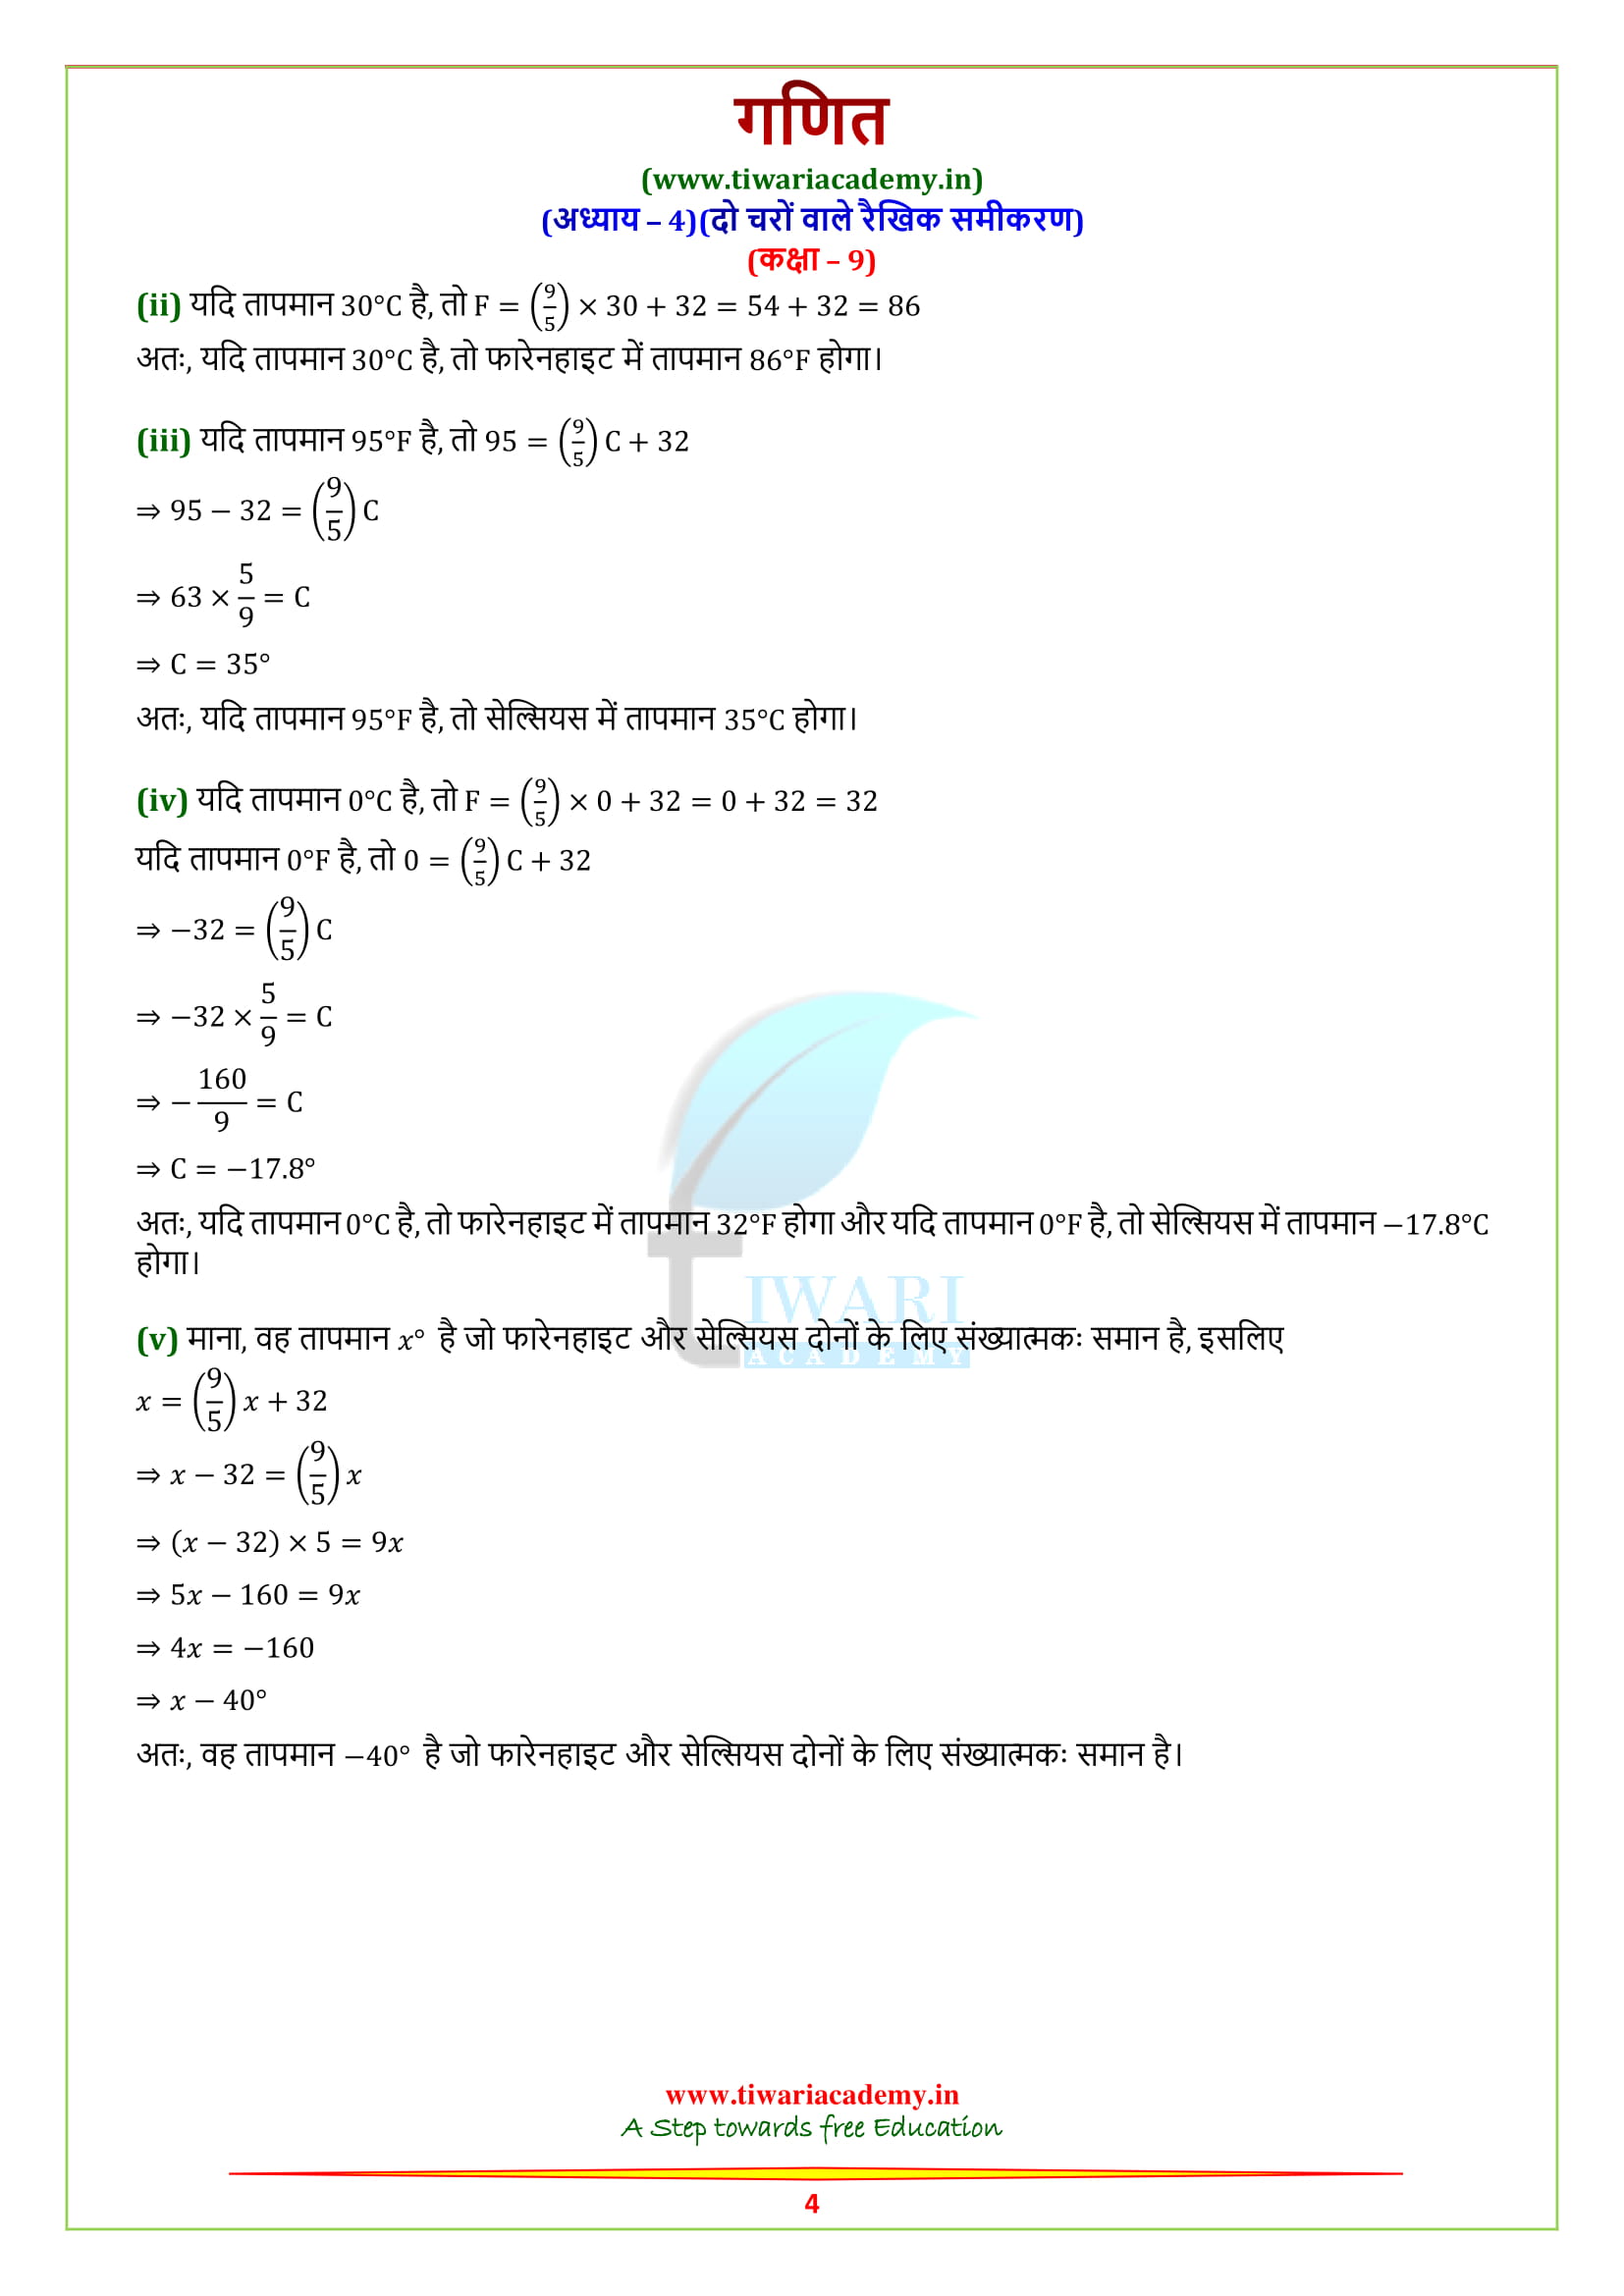 9 Maths Exercise 4.3 Solutions free to download